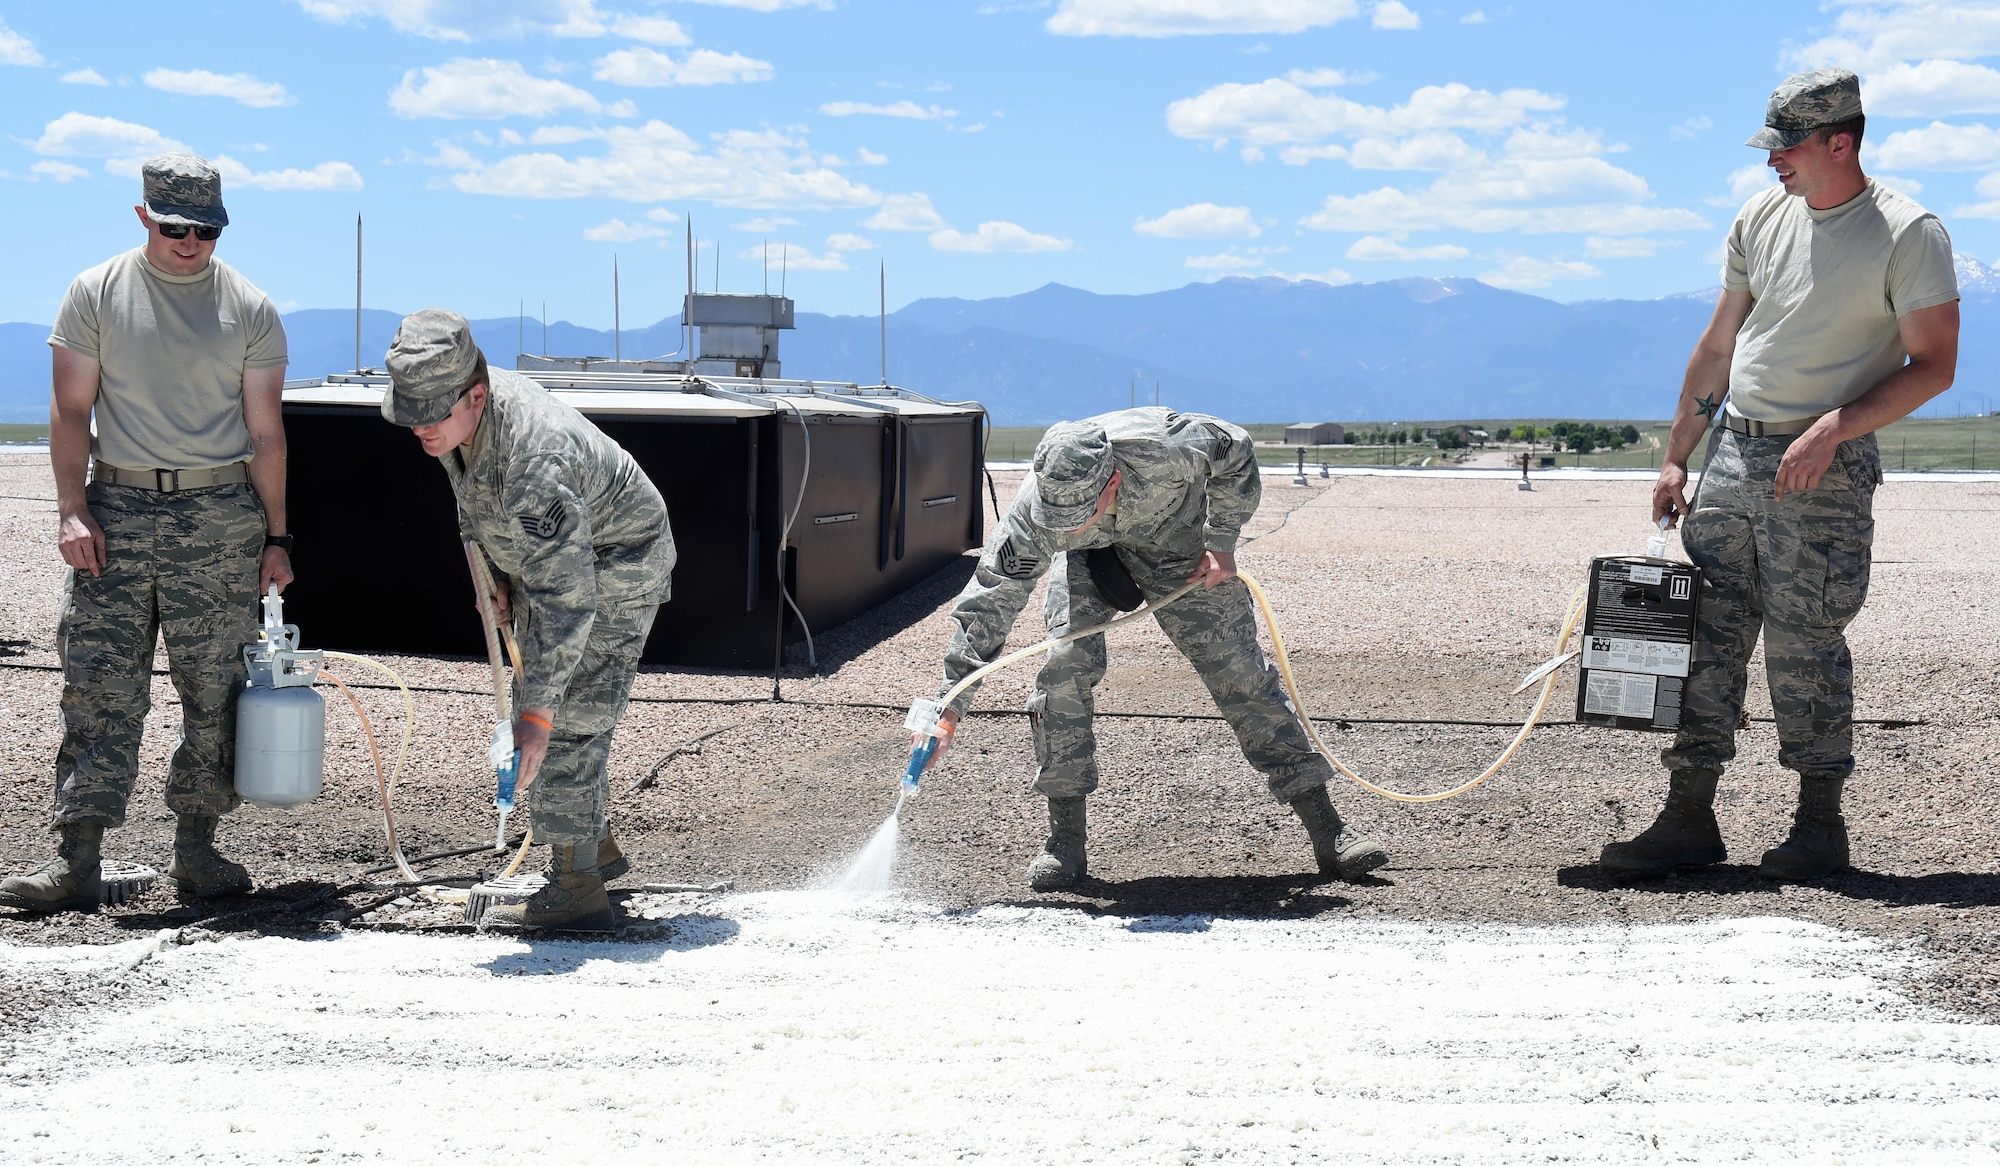 50th Civil Engineer Squadron members and 446th Civil Engineer Squadron reservists from Joint Base Lewis-McChord, Washington, use roofing foam to seal roof leaks at Schriever Air Force Base, Colorado Thursday June 15, 2017. The 446 CES reservists will be at Schriever until the end of the month to work alongside the 50 CES. (U.S. Air Force photo/Senior Airman Arielle Vasquez)